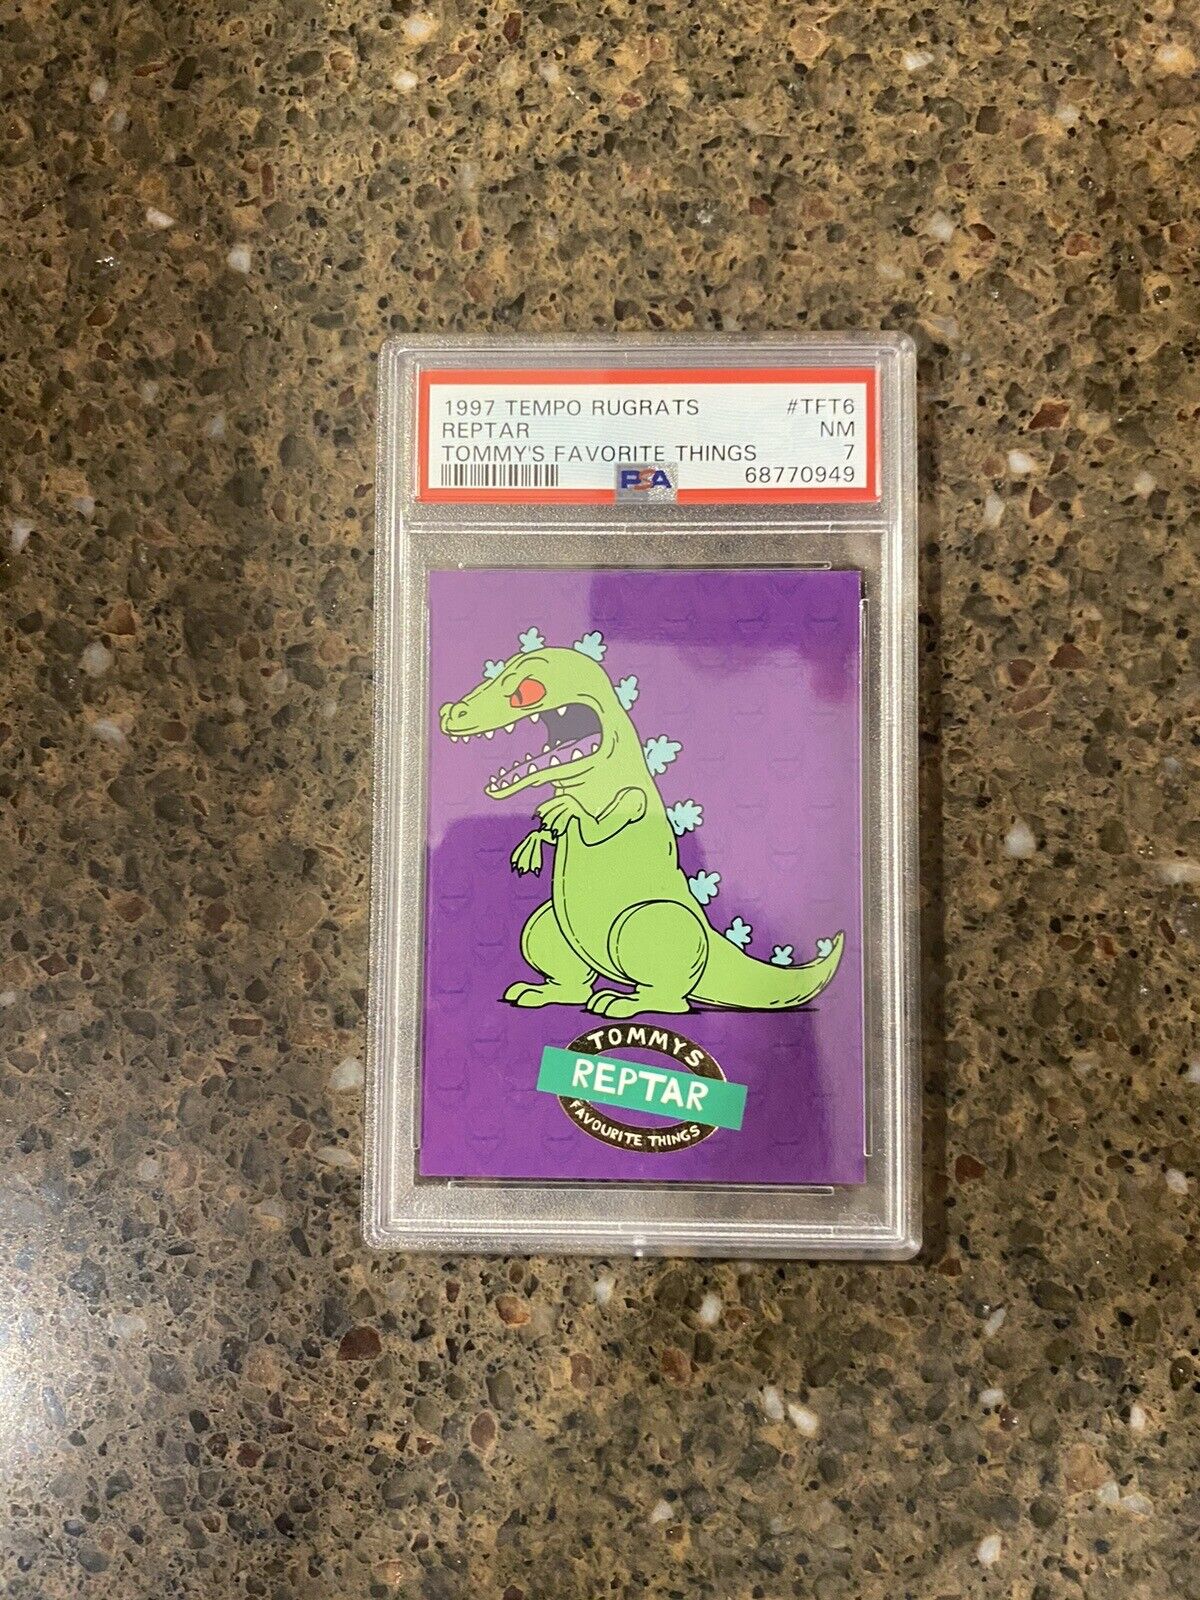 1997 Tempo Trading Cards Nickelodeon Rugrats Tommy’s Reptar Promo Card TFT6